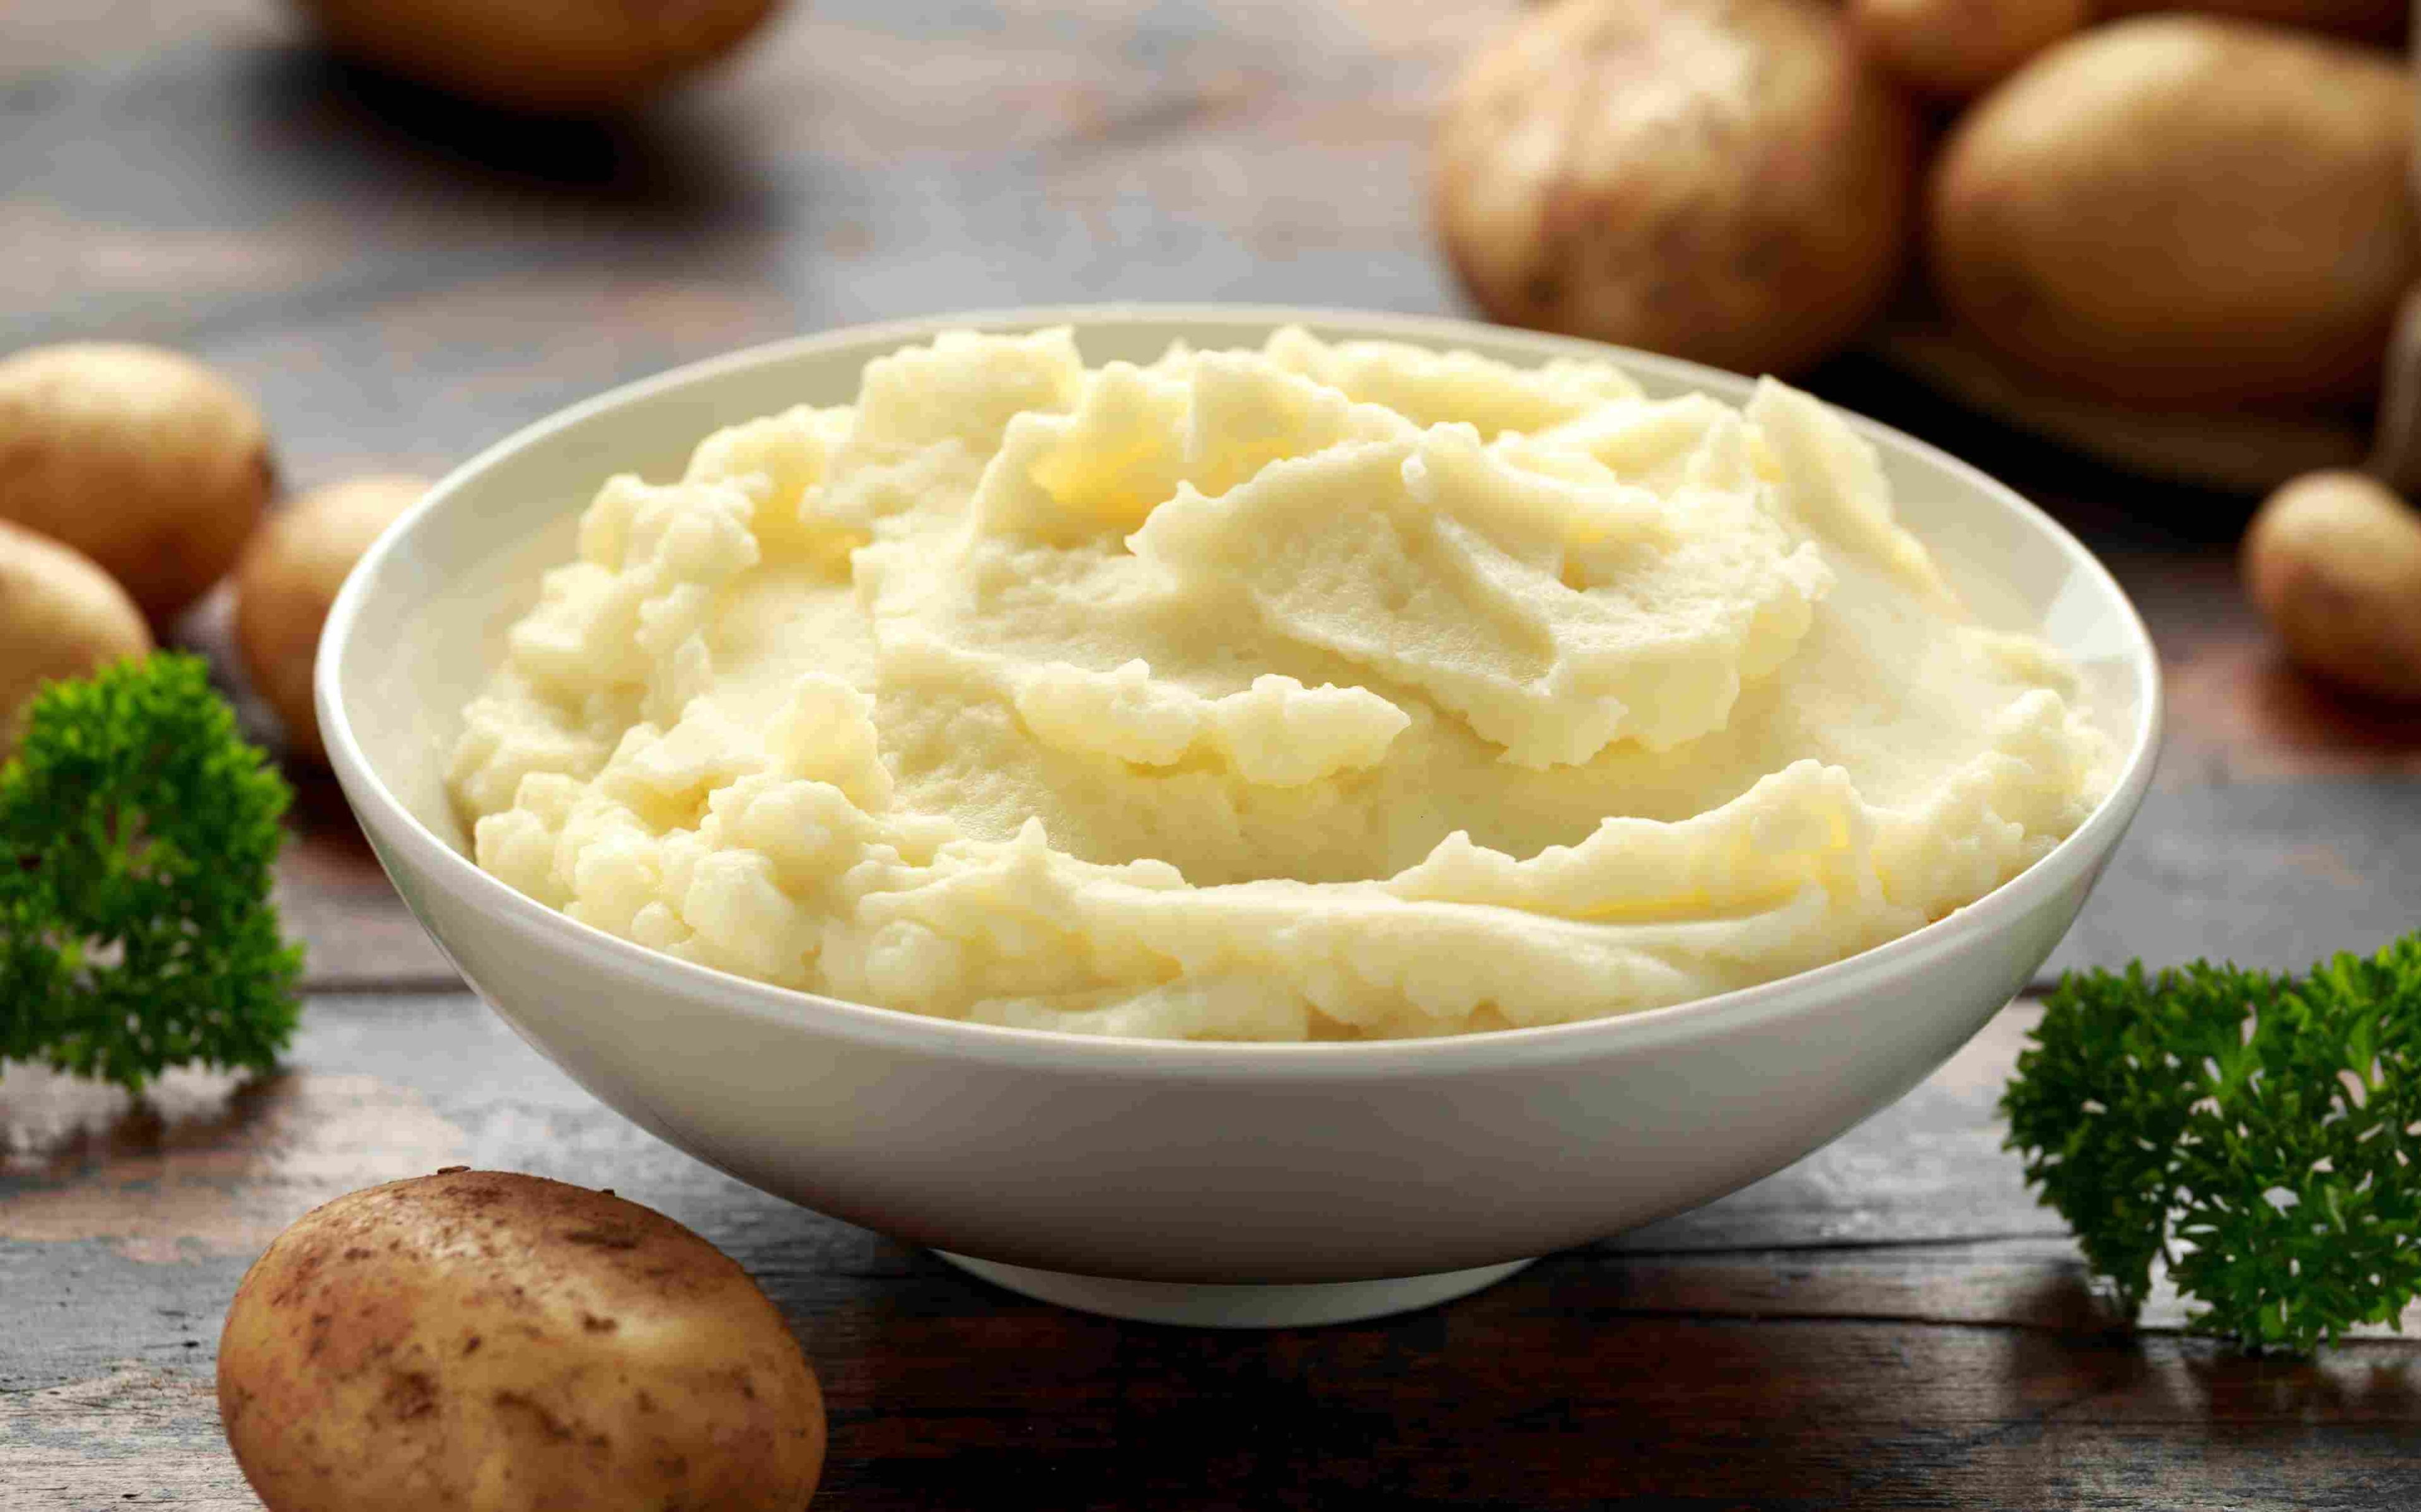 Mashed potatoes in white bowl on wooden rustic table